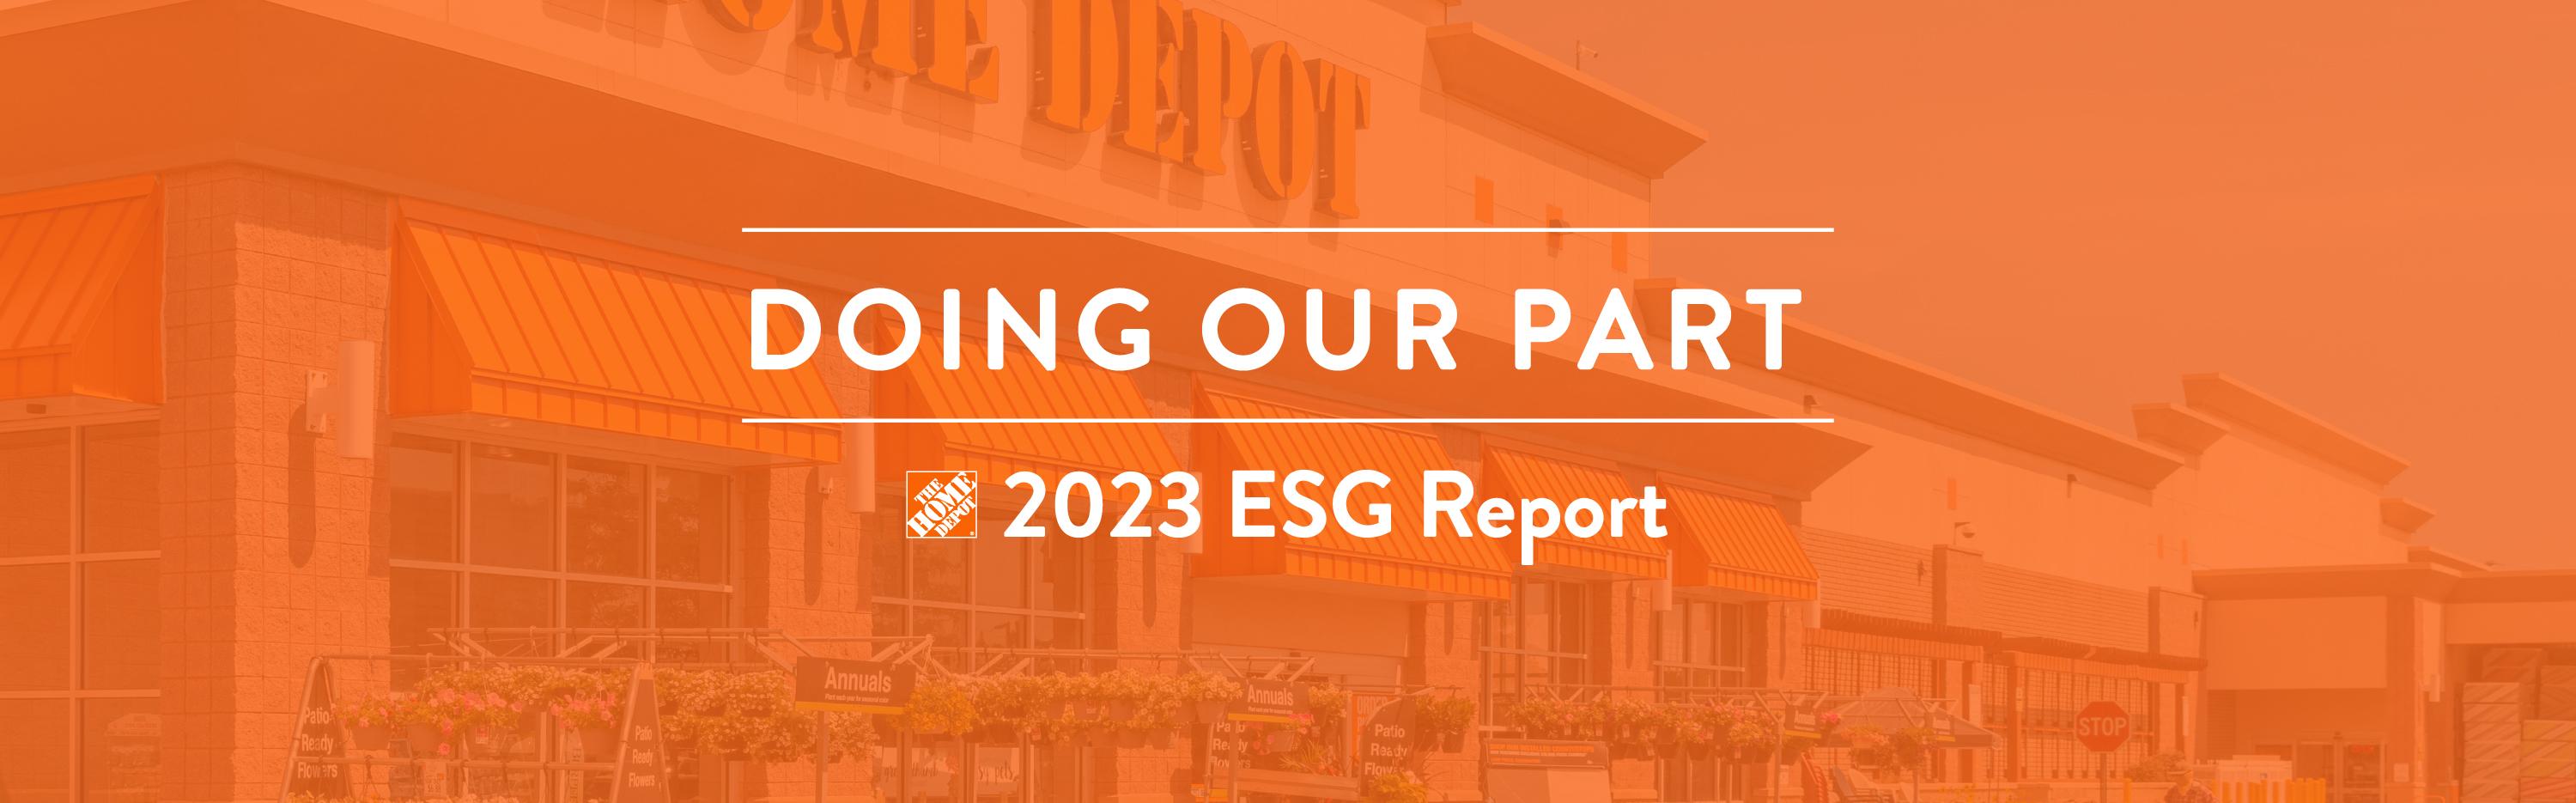 Doing out Part - 2023 ESG Report